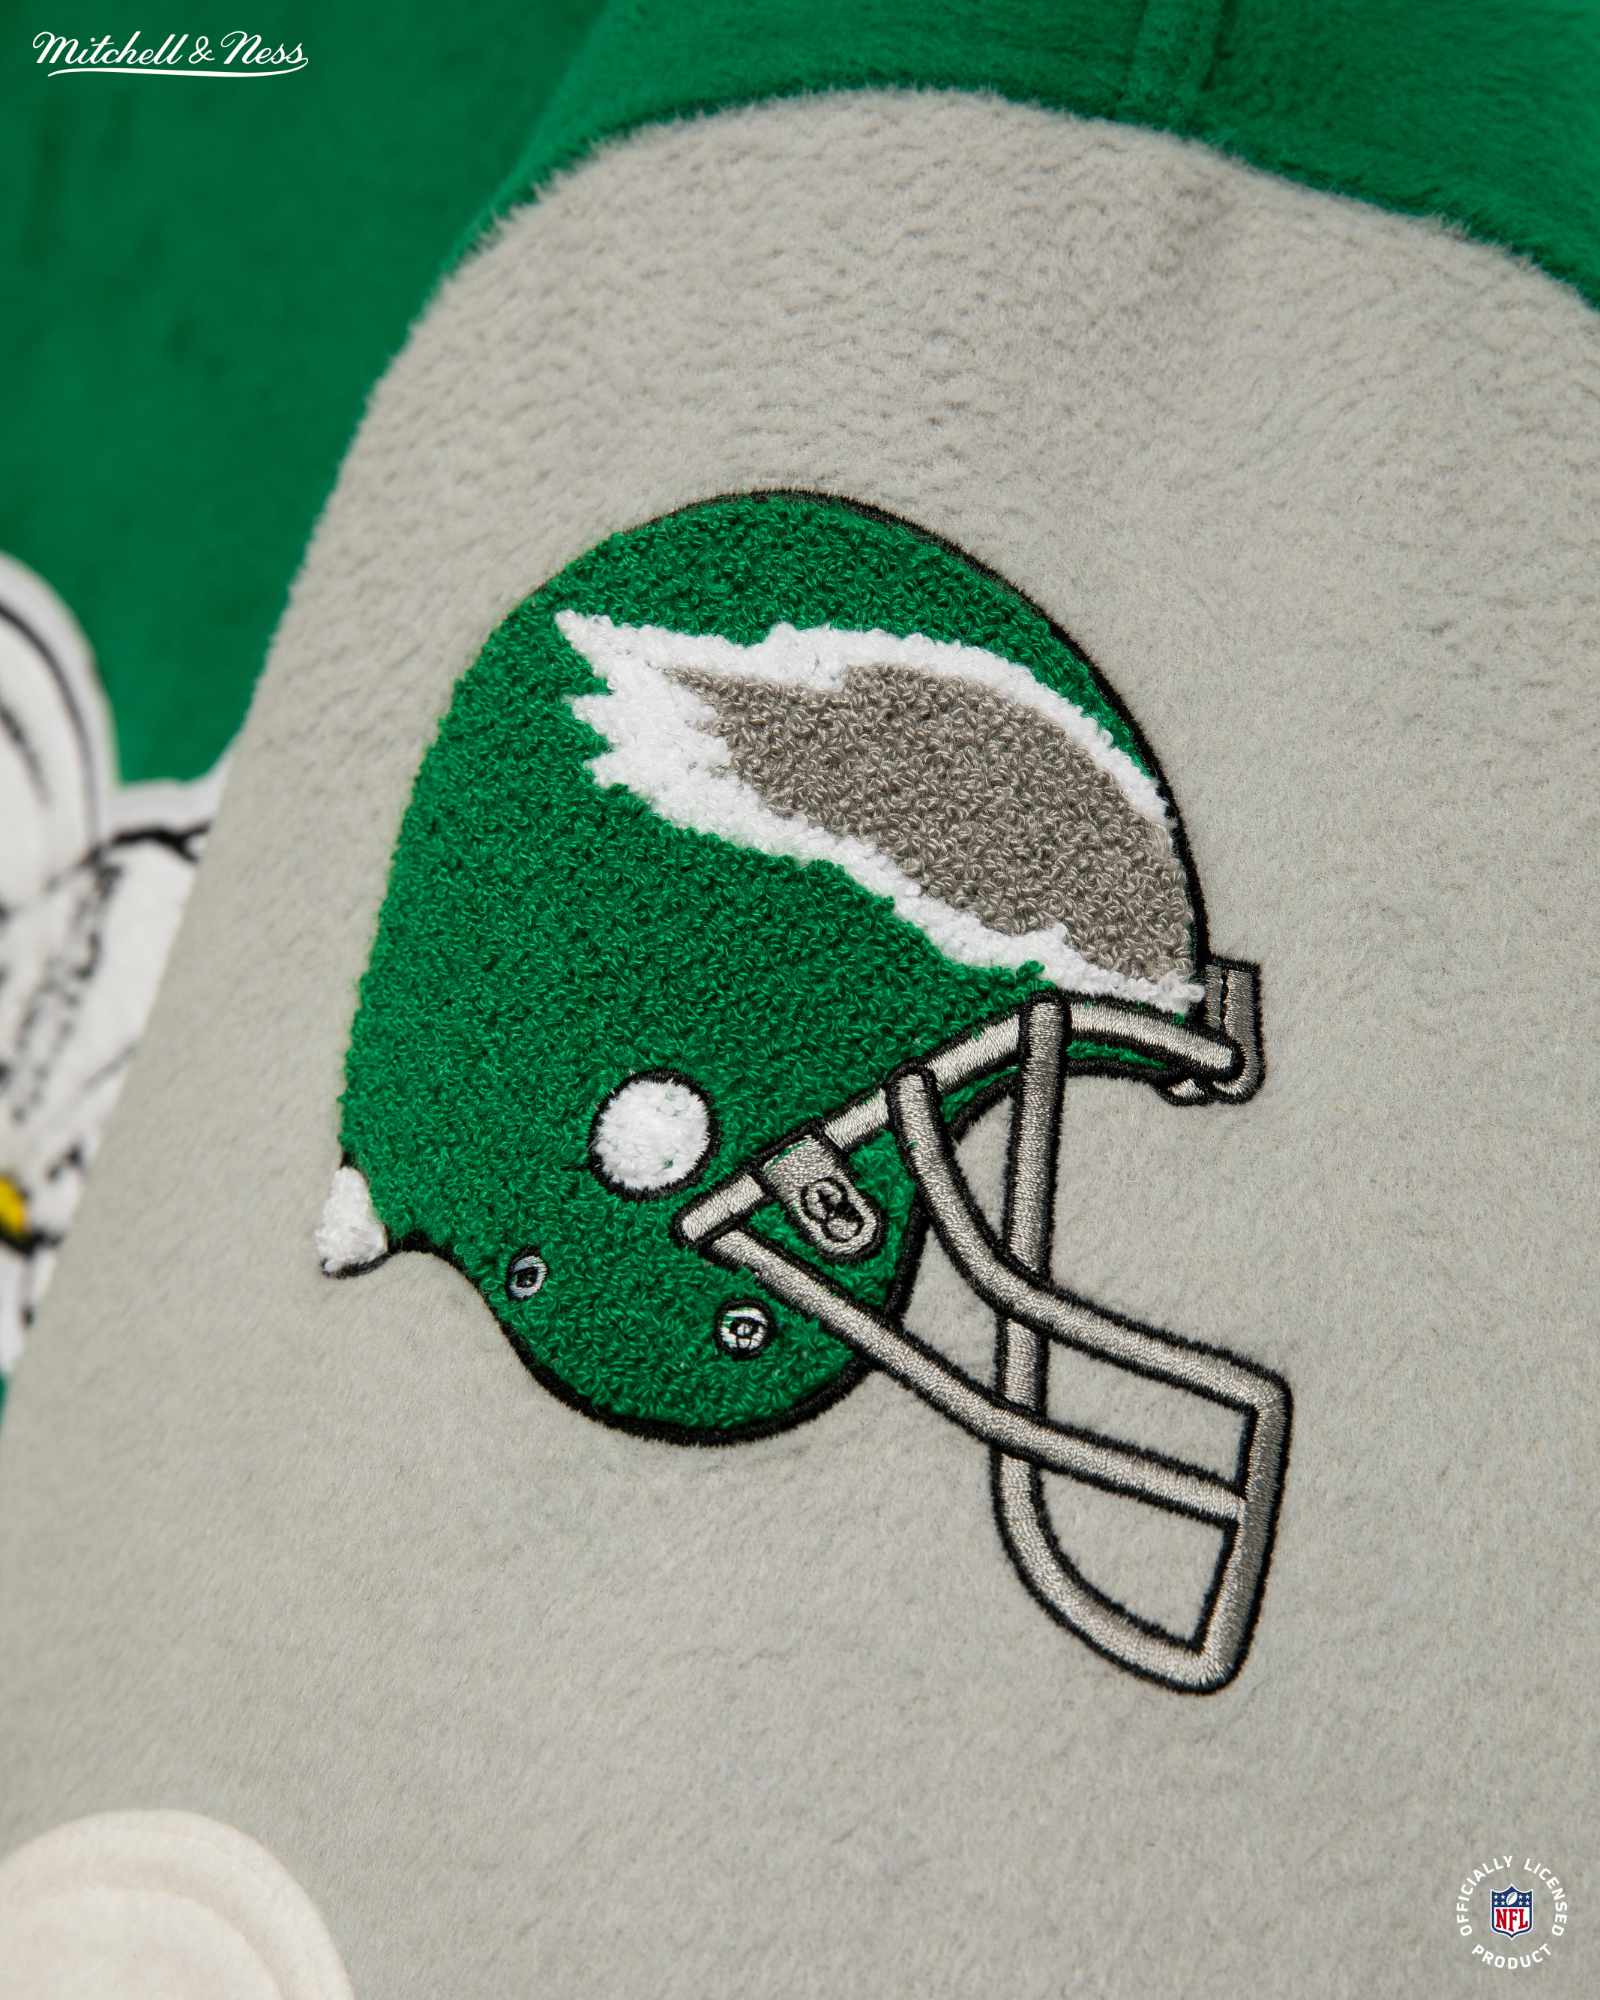 Product photos of Mitchel & Ness' Princess Diana Eagles jacket recreation in green wool and silver leather releasing in November 2023